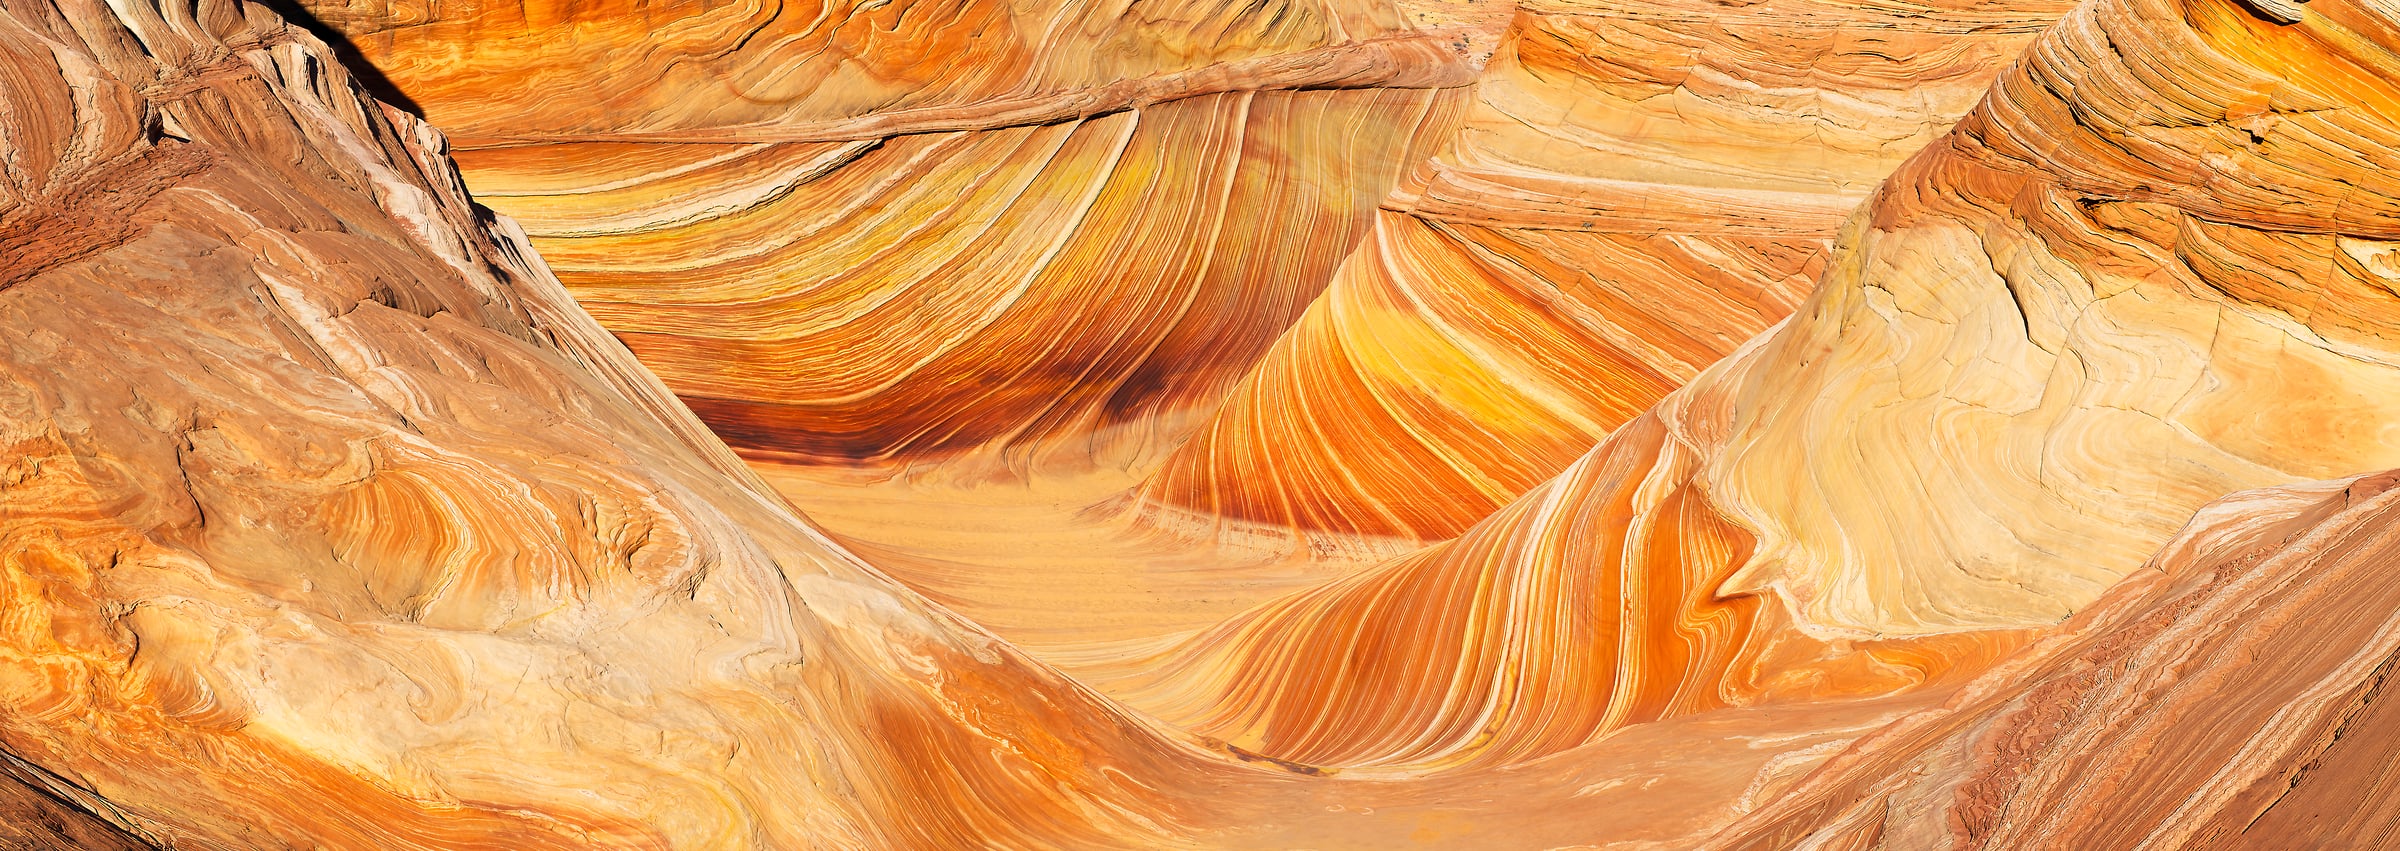 276 megapixels! A very high resolution, large-format VAST photo print of The Wave in Paria Canyon-Vermilion Cliffs Wilderness, Arizona; photograph created by David David.